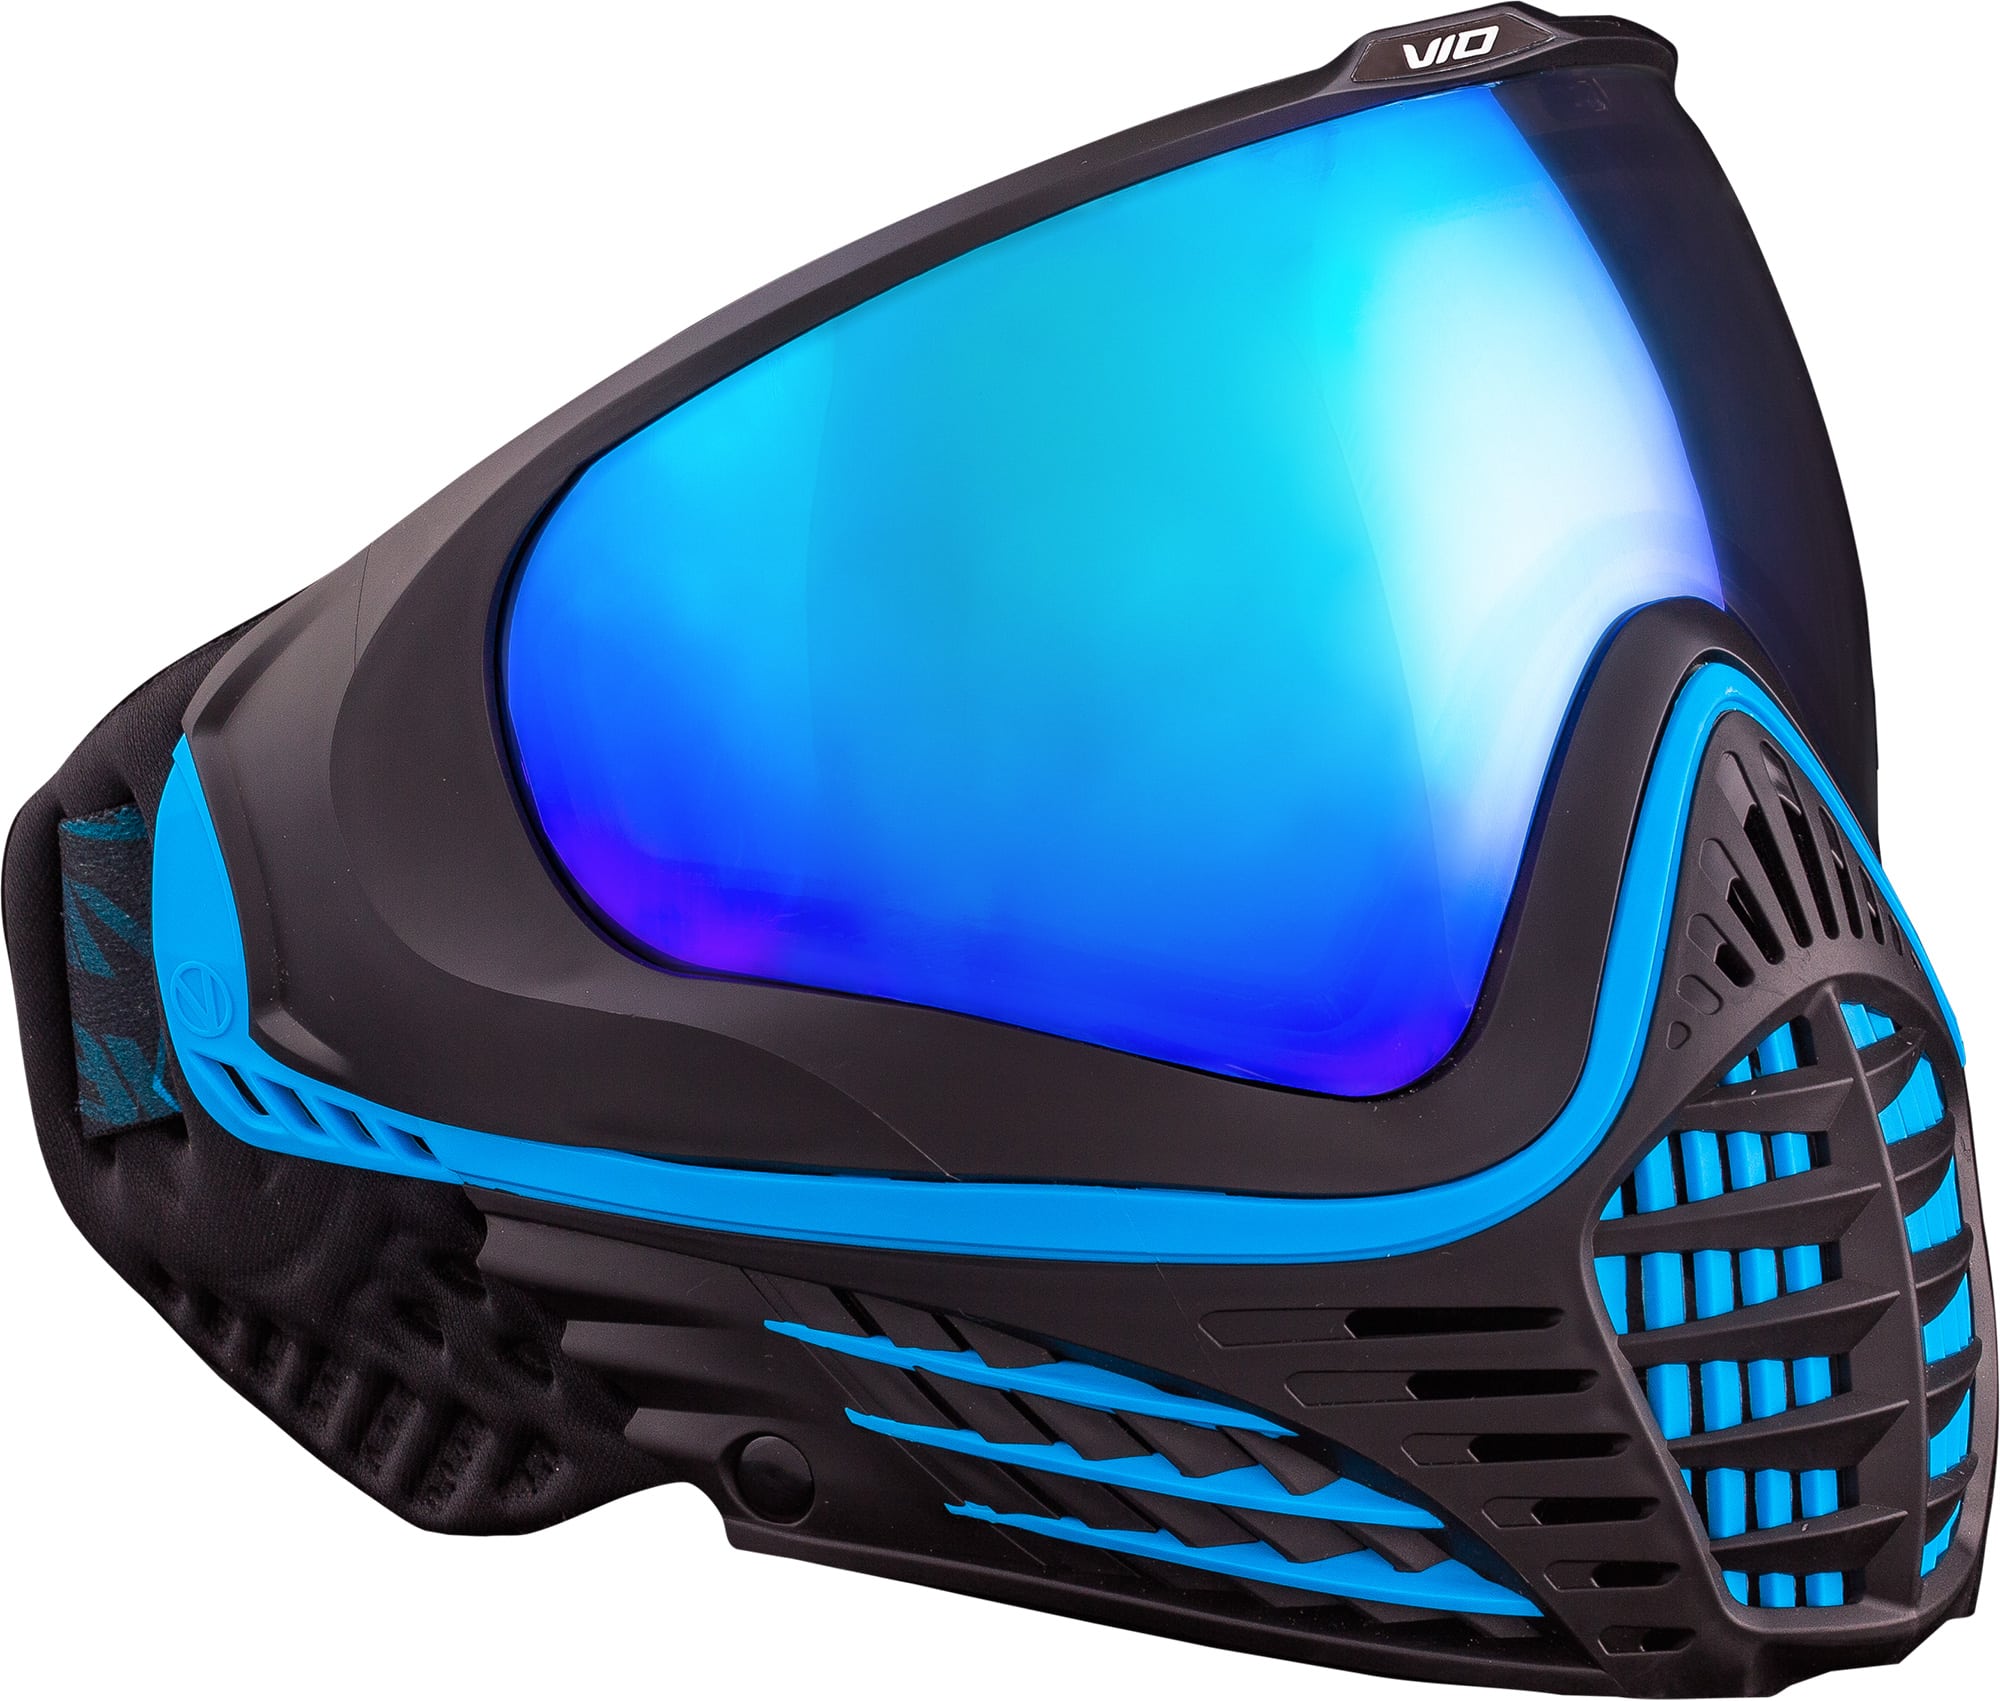 Masks - VIRTUE VIO CONTOUR THERMAL PAINTBALL GOGGLE - BLACK ICE was listed  for R2,460.00 on 20 Oct at 15:08 by Blades & Triggers in Johannesburg  (ID:533043007)